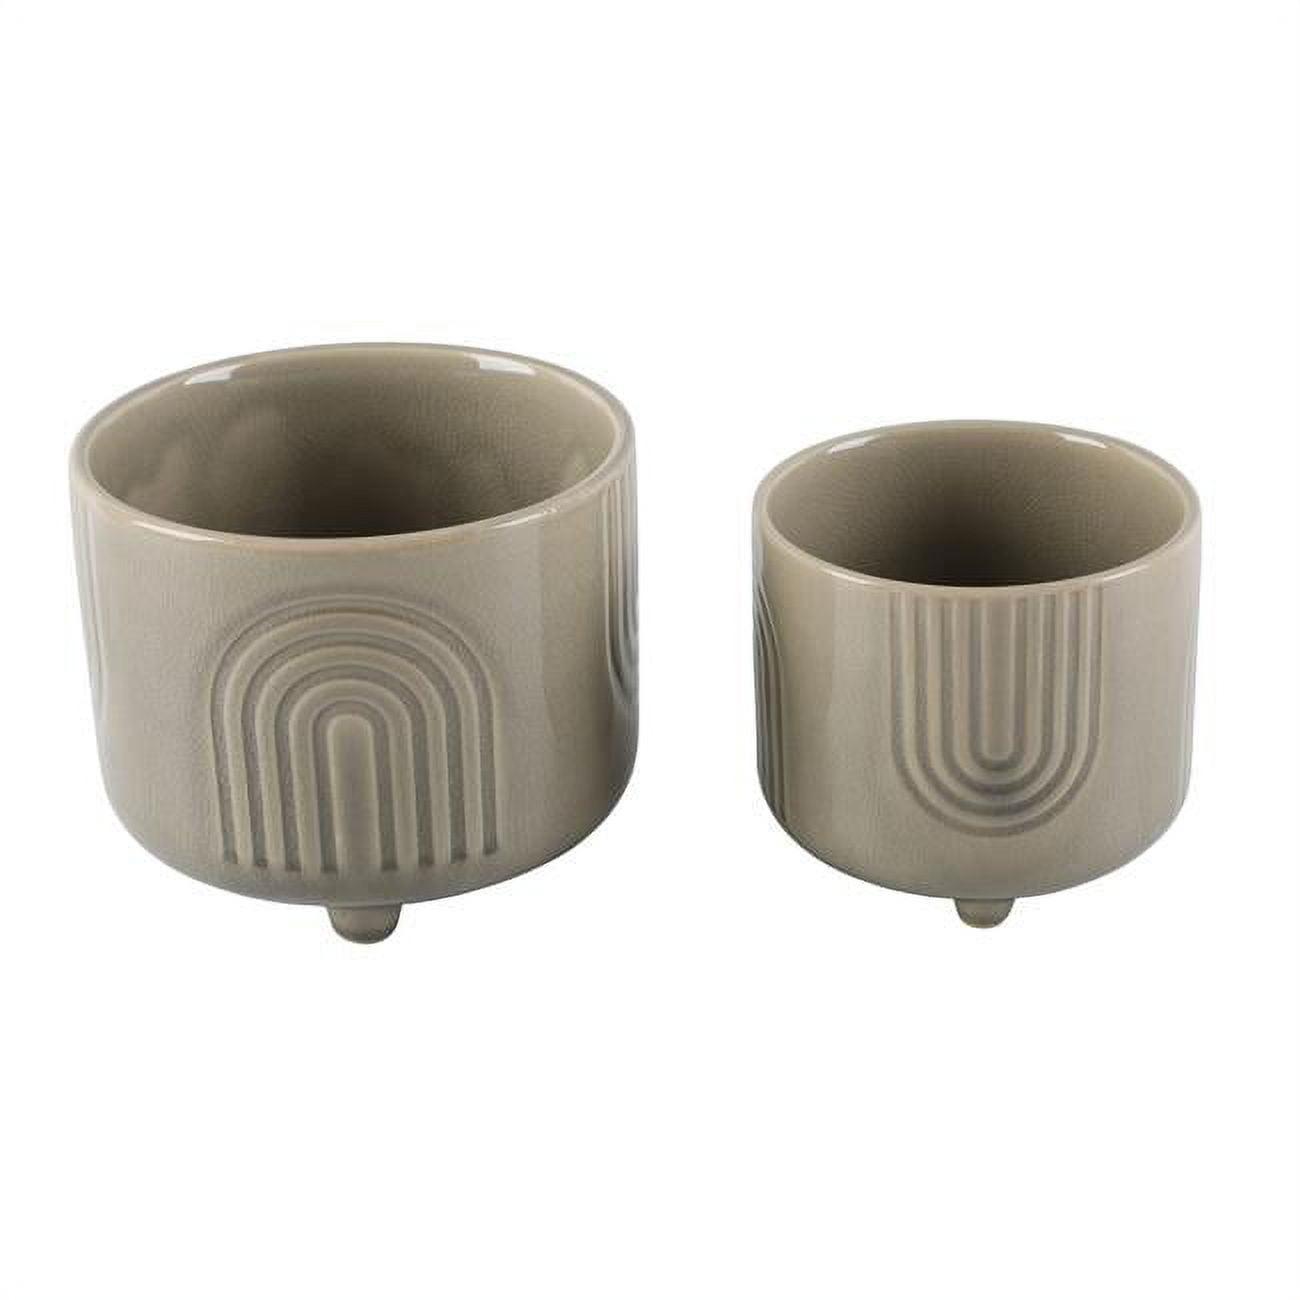 Olive Green Ceramic Footed Planter Set with Geometric Patterns